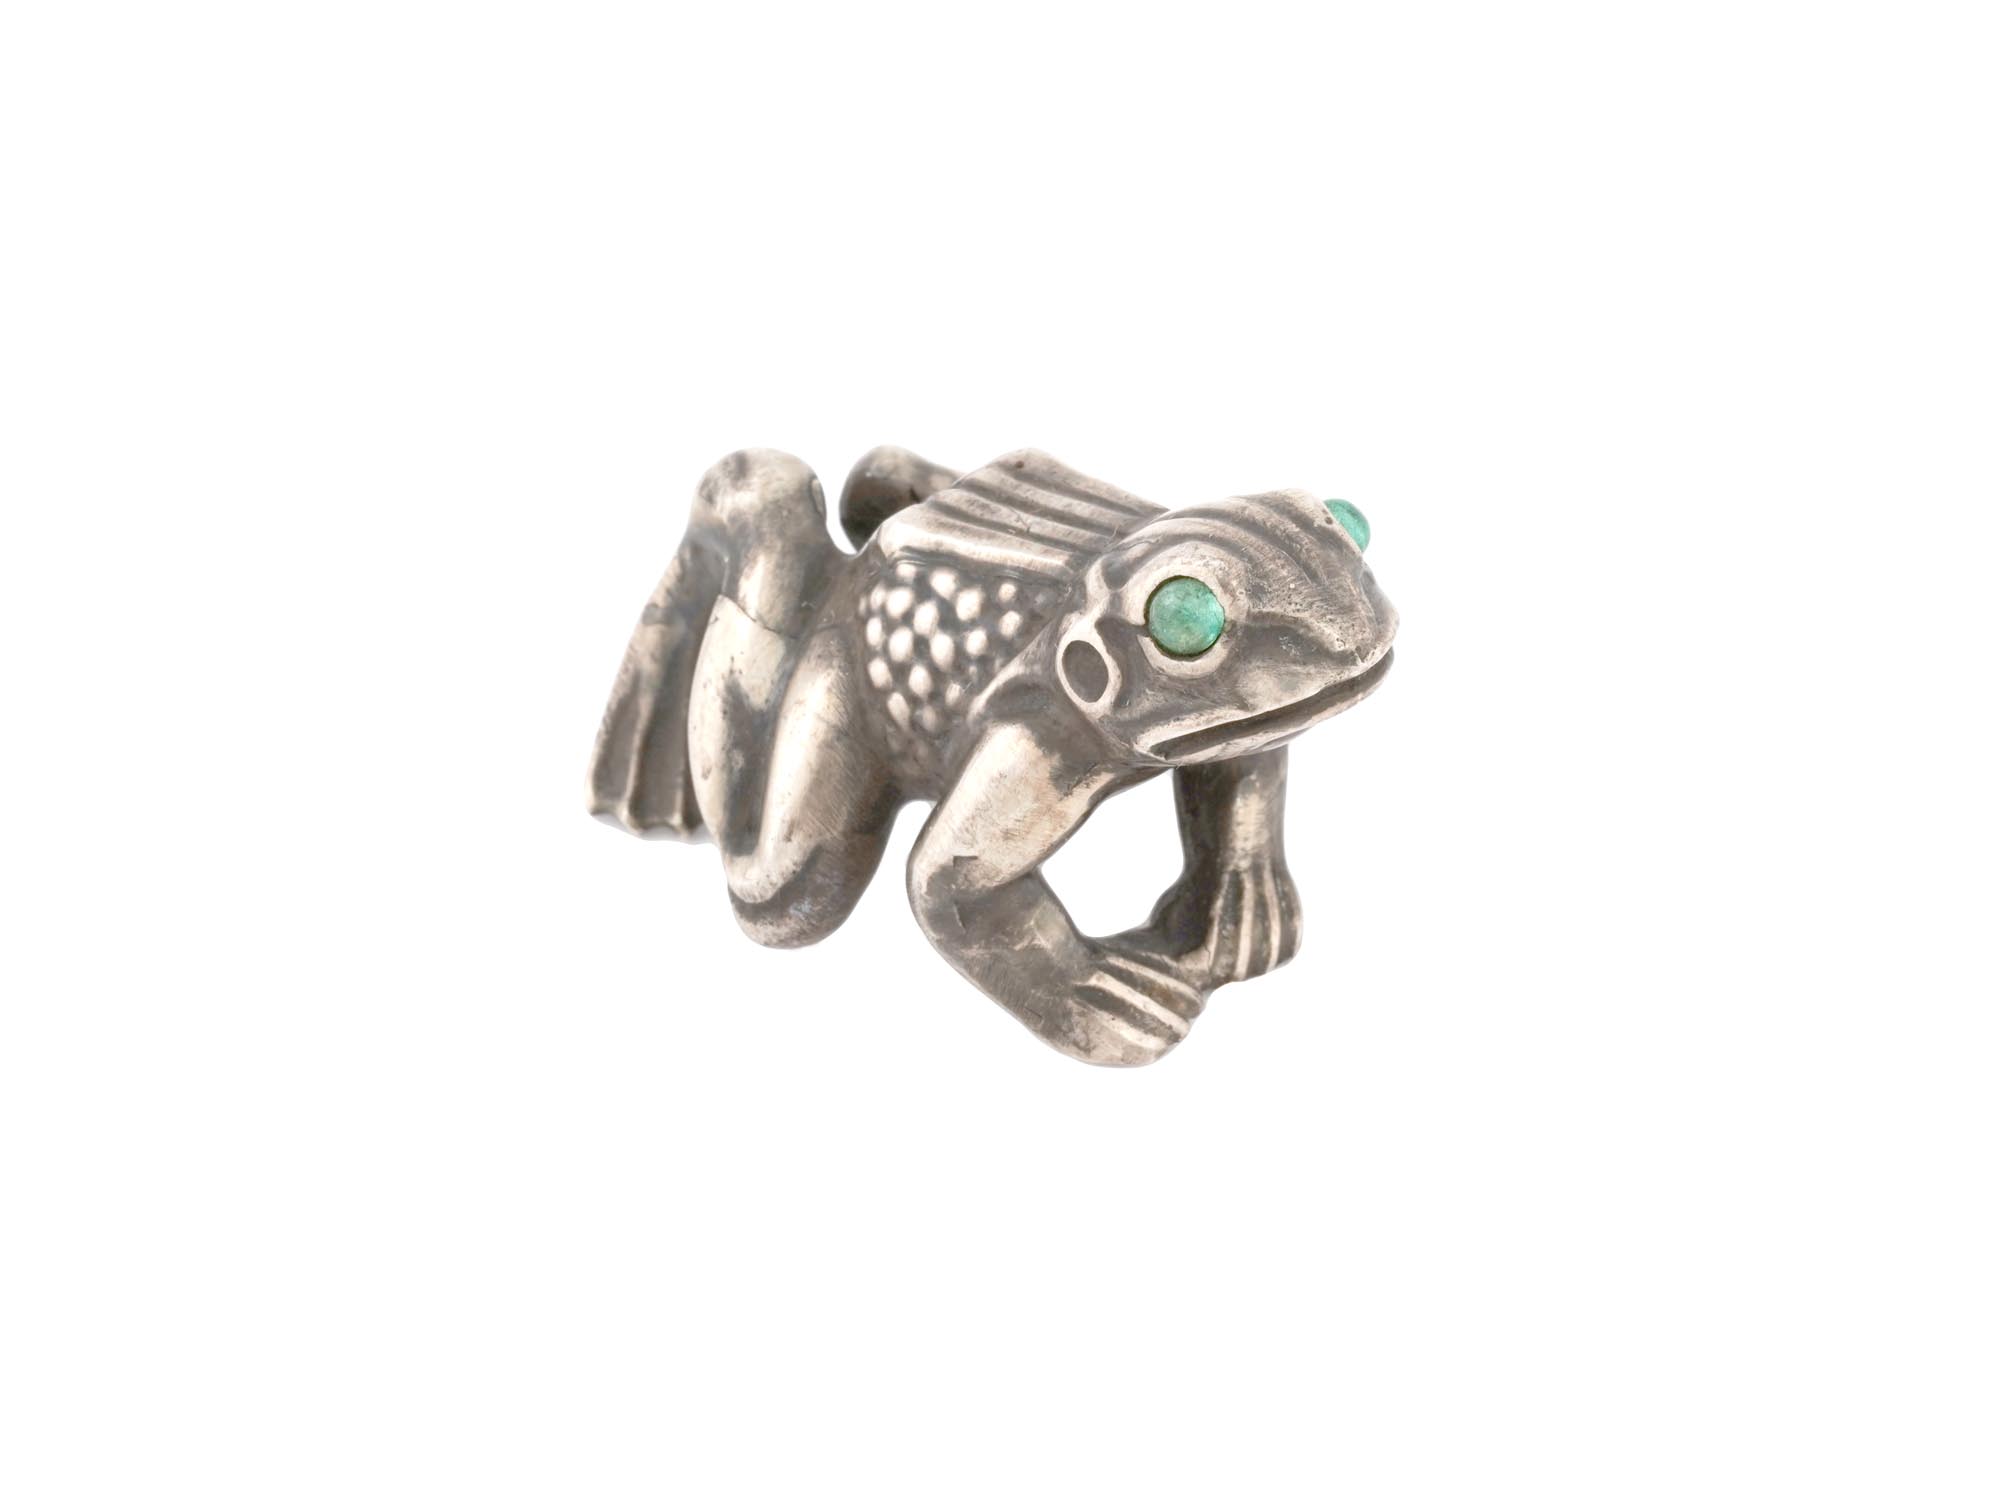 RUSSIAN SILVER FIGURE OF FROG WITH EMERALD EYES PIC-0